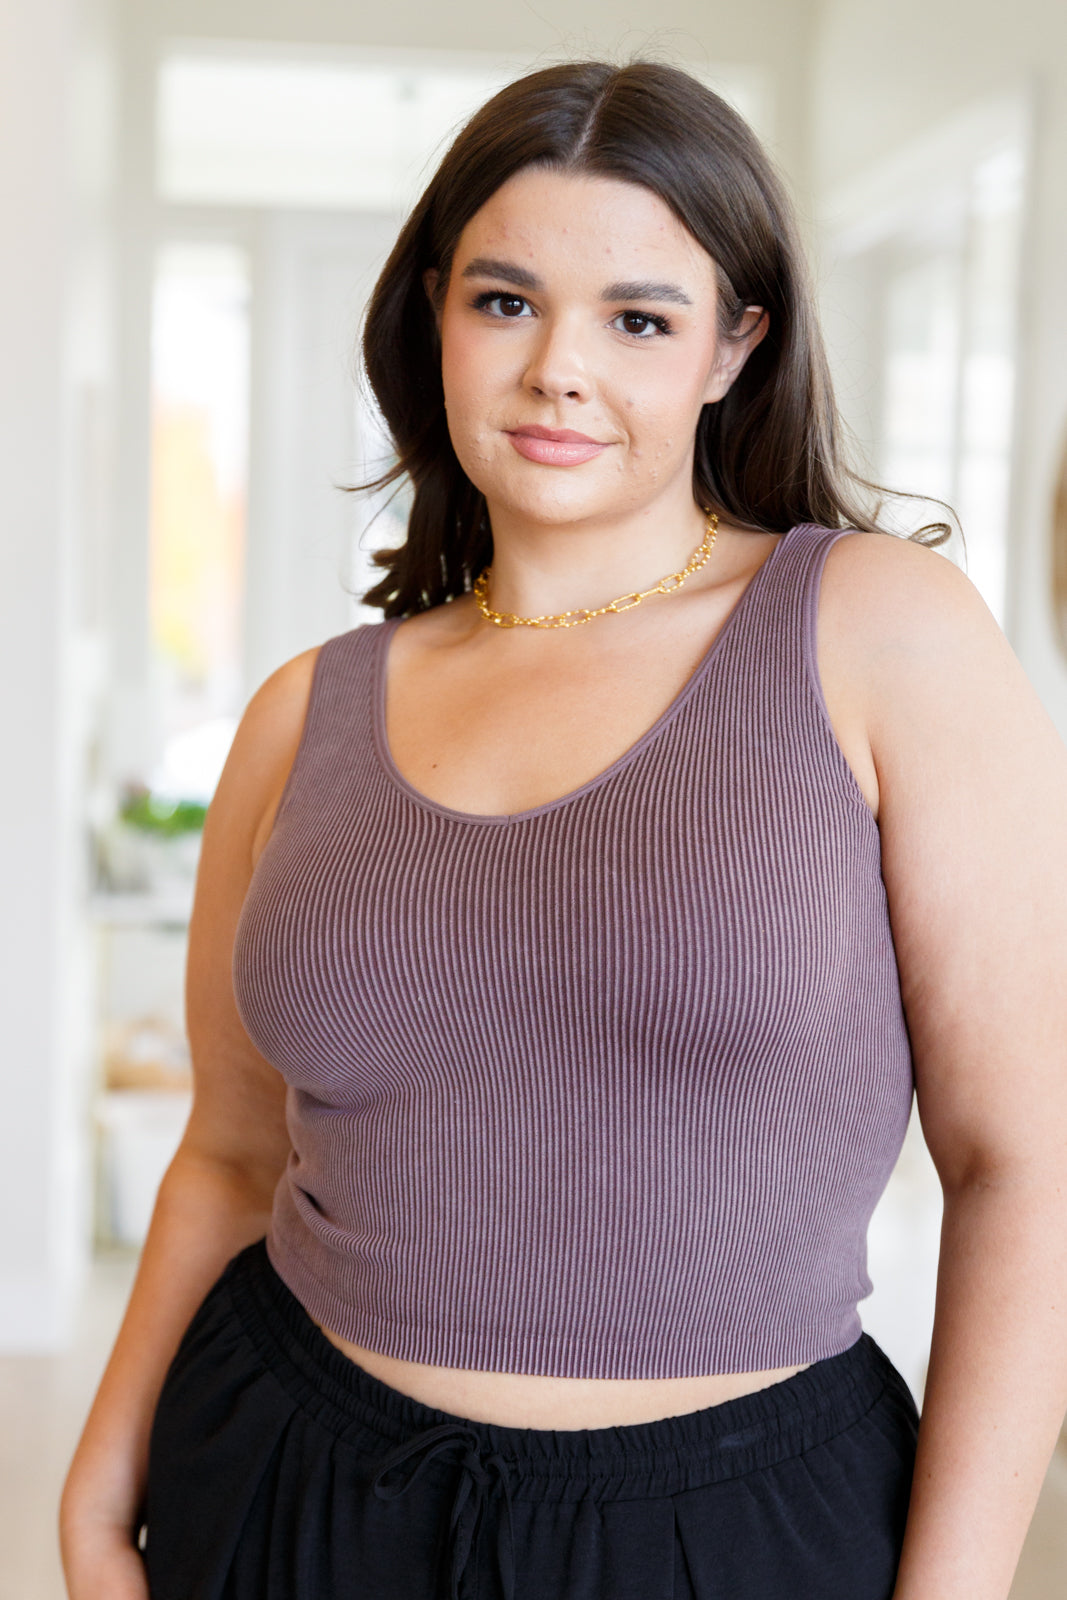 This tank is the perfect combination of function and fashion. Crafted from ribbed fabric with a seamless finish, it offers a flattering, cropped fit that can be customized with your choice of v-neck or scoop neck. Plus, its mineral wash makes it a true stand-out piece.